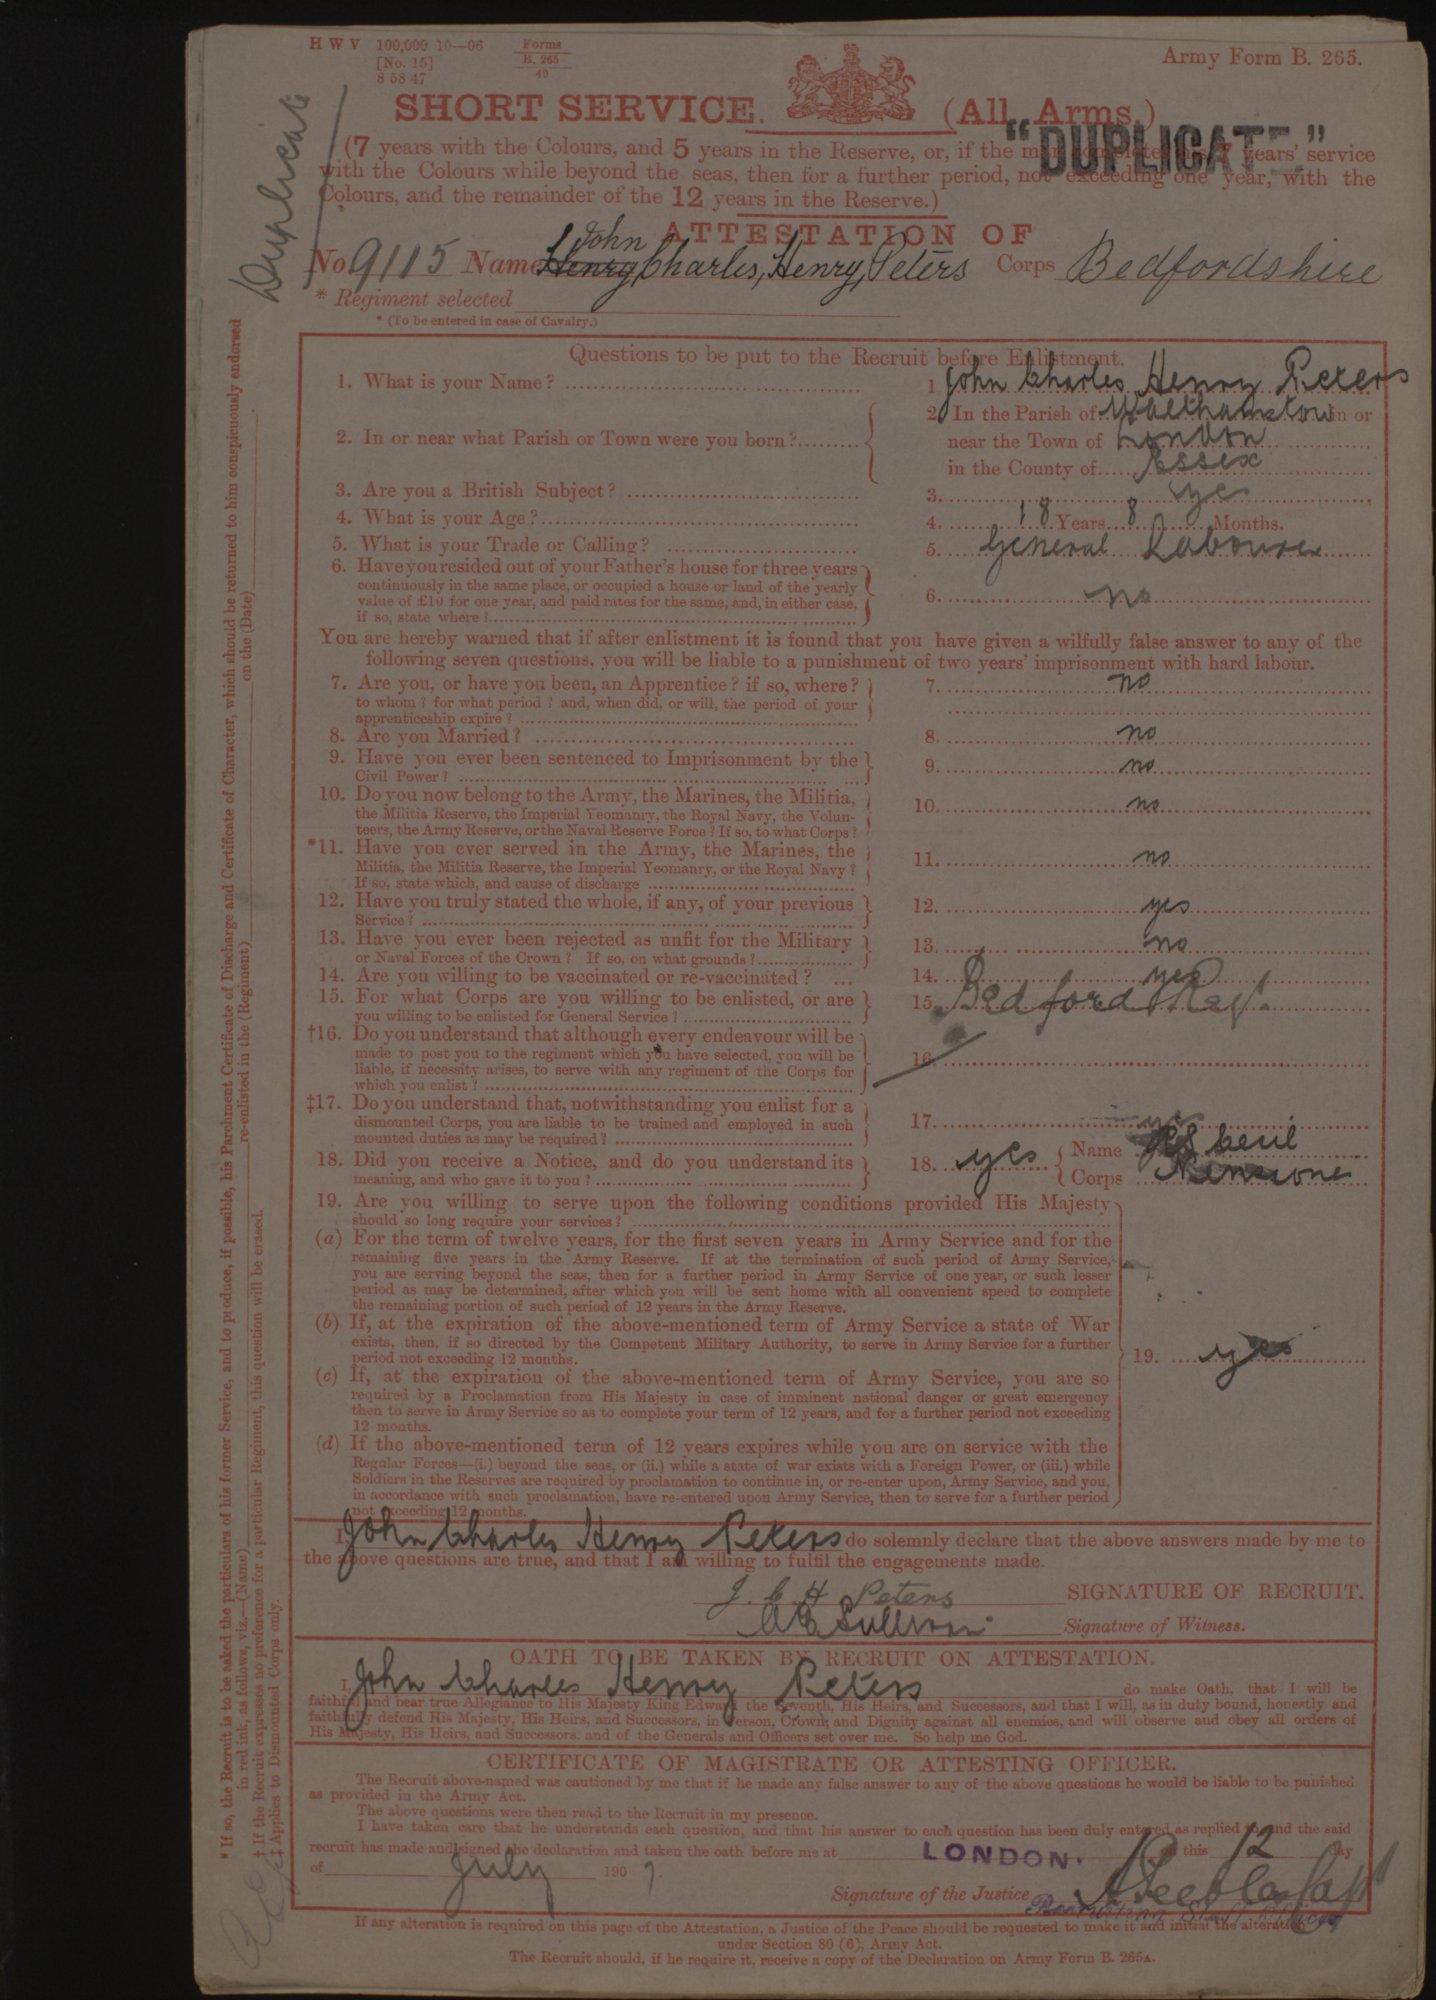 John Charles Henry Peters, army records